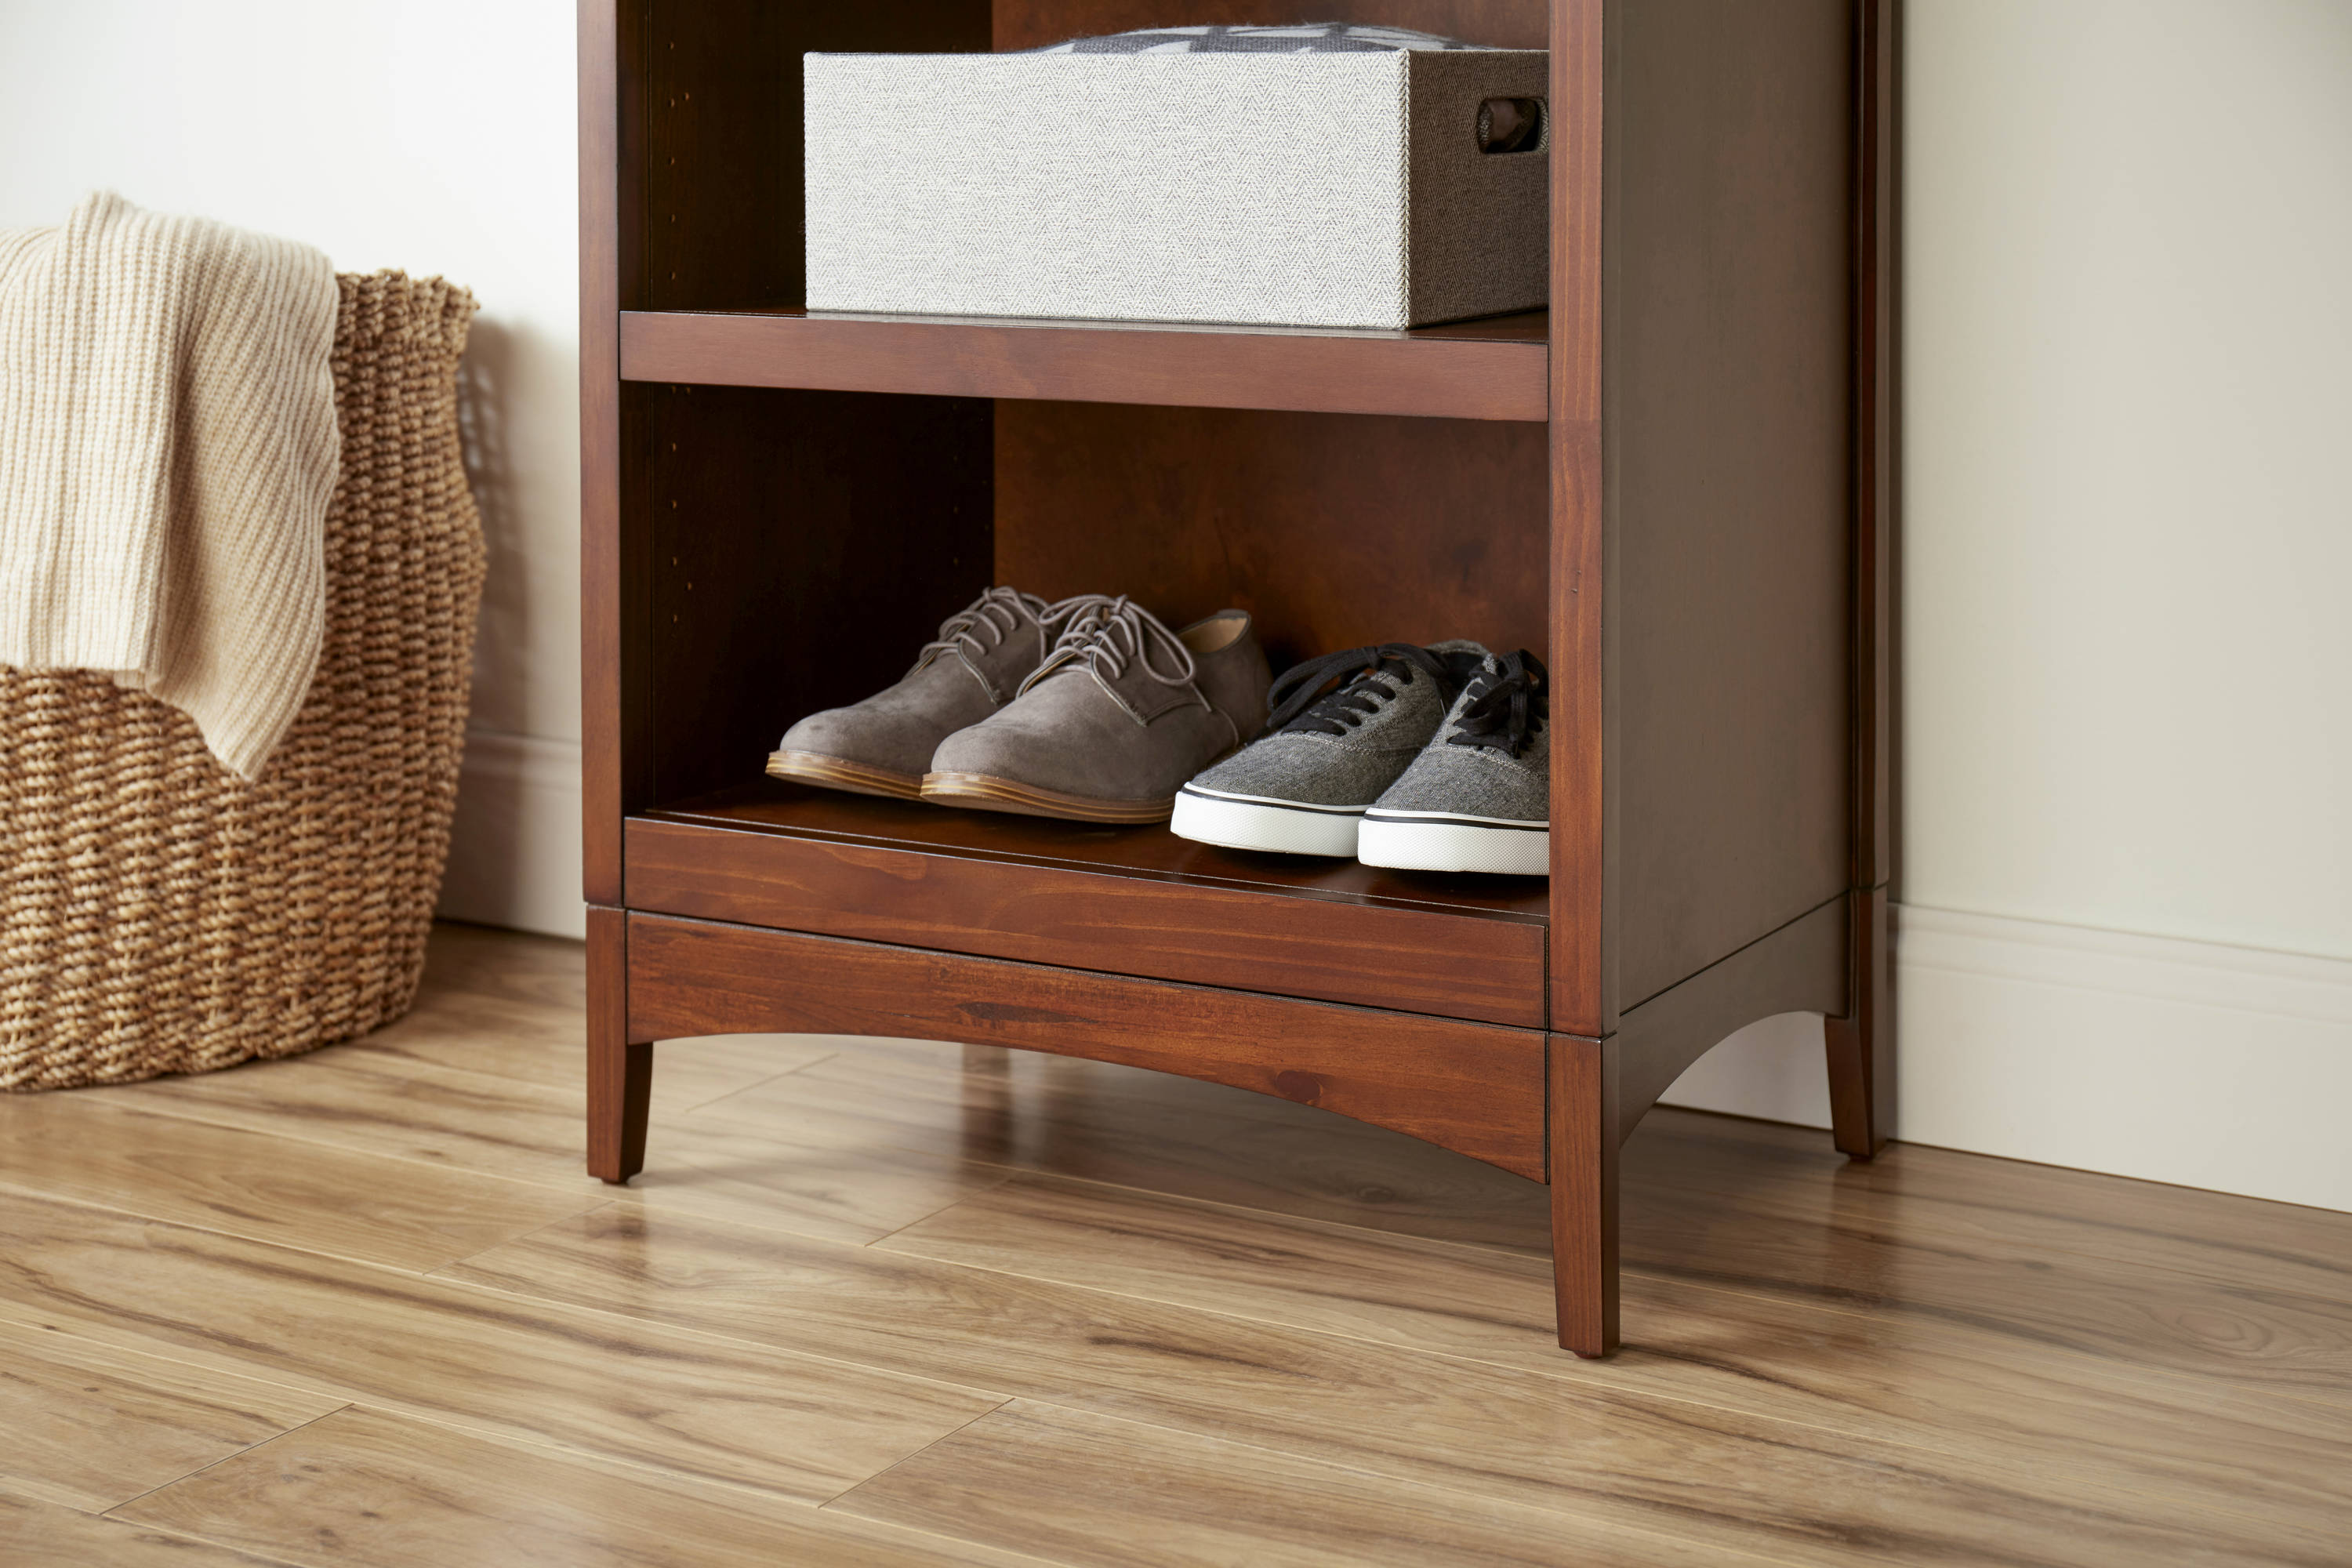 Large white walk-in closet features floor-to-ceiling custom shoe shelves  and a light tan bench.